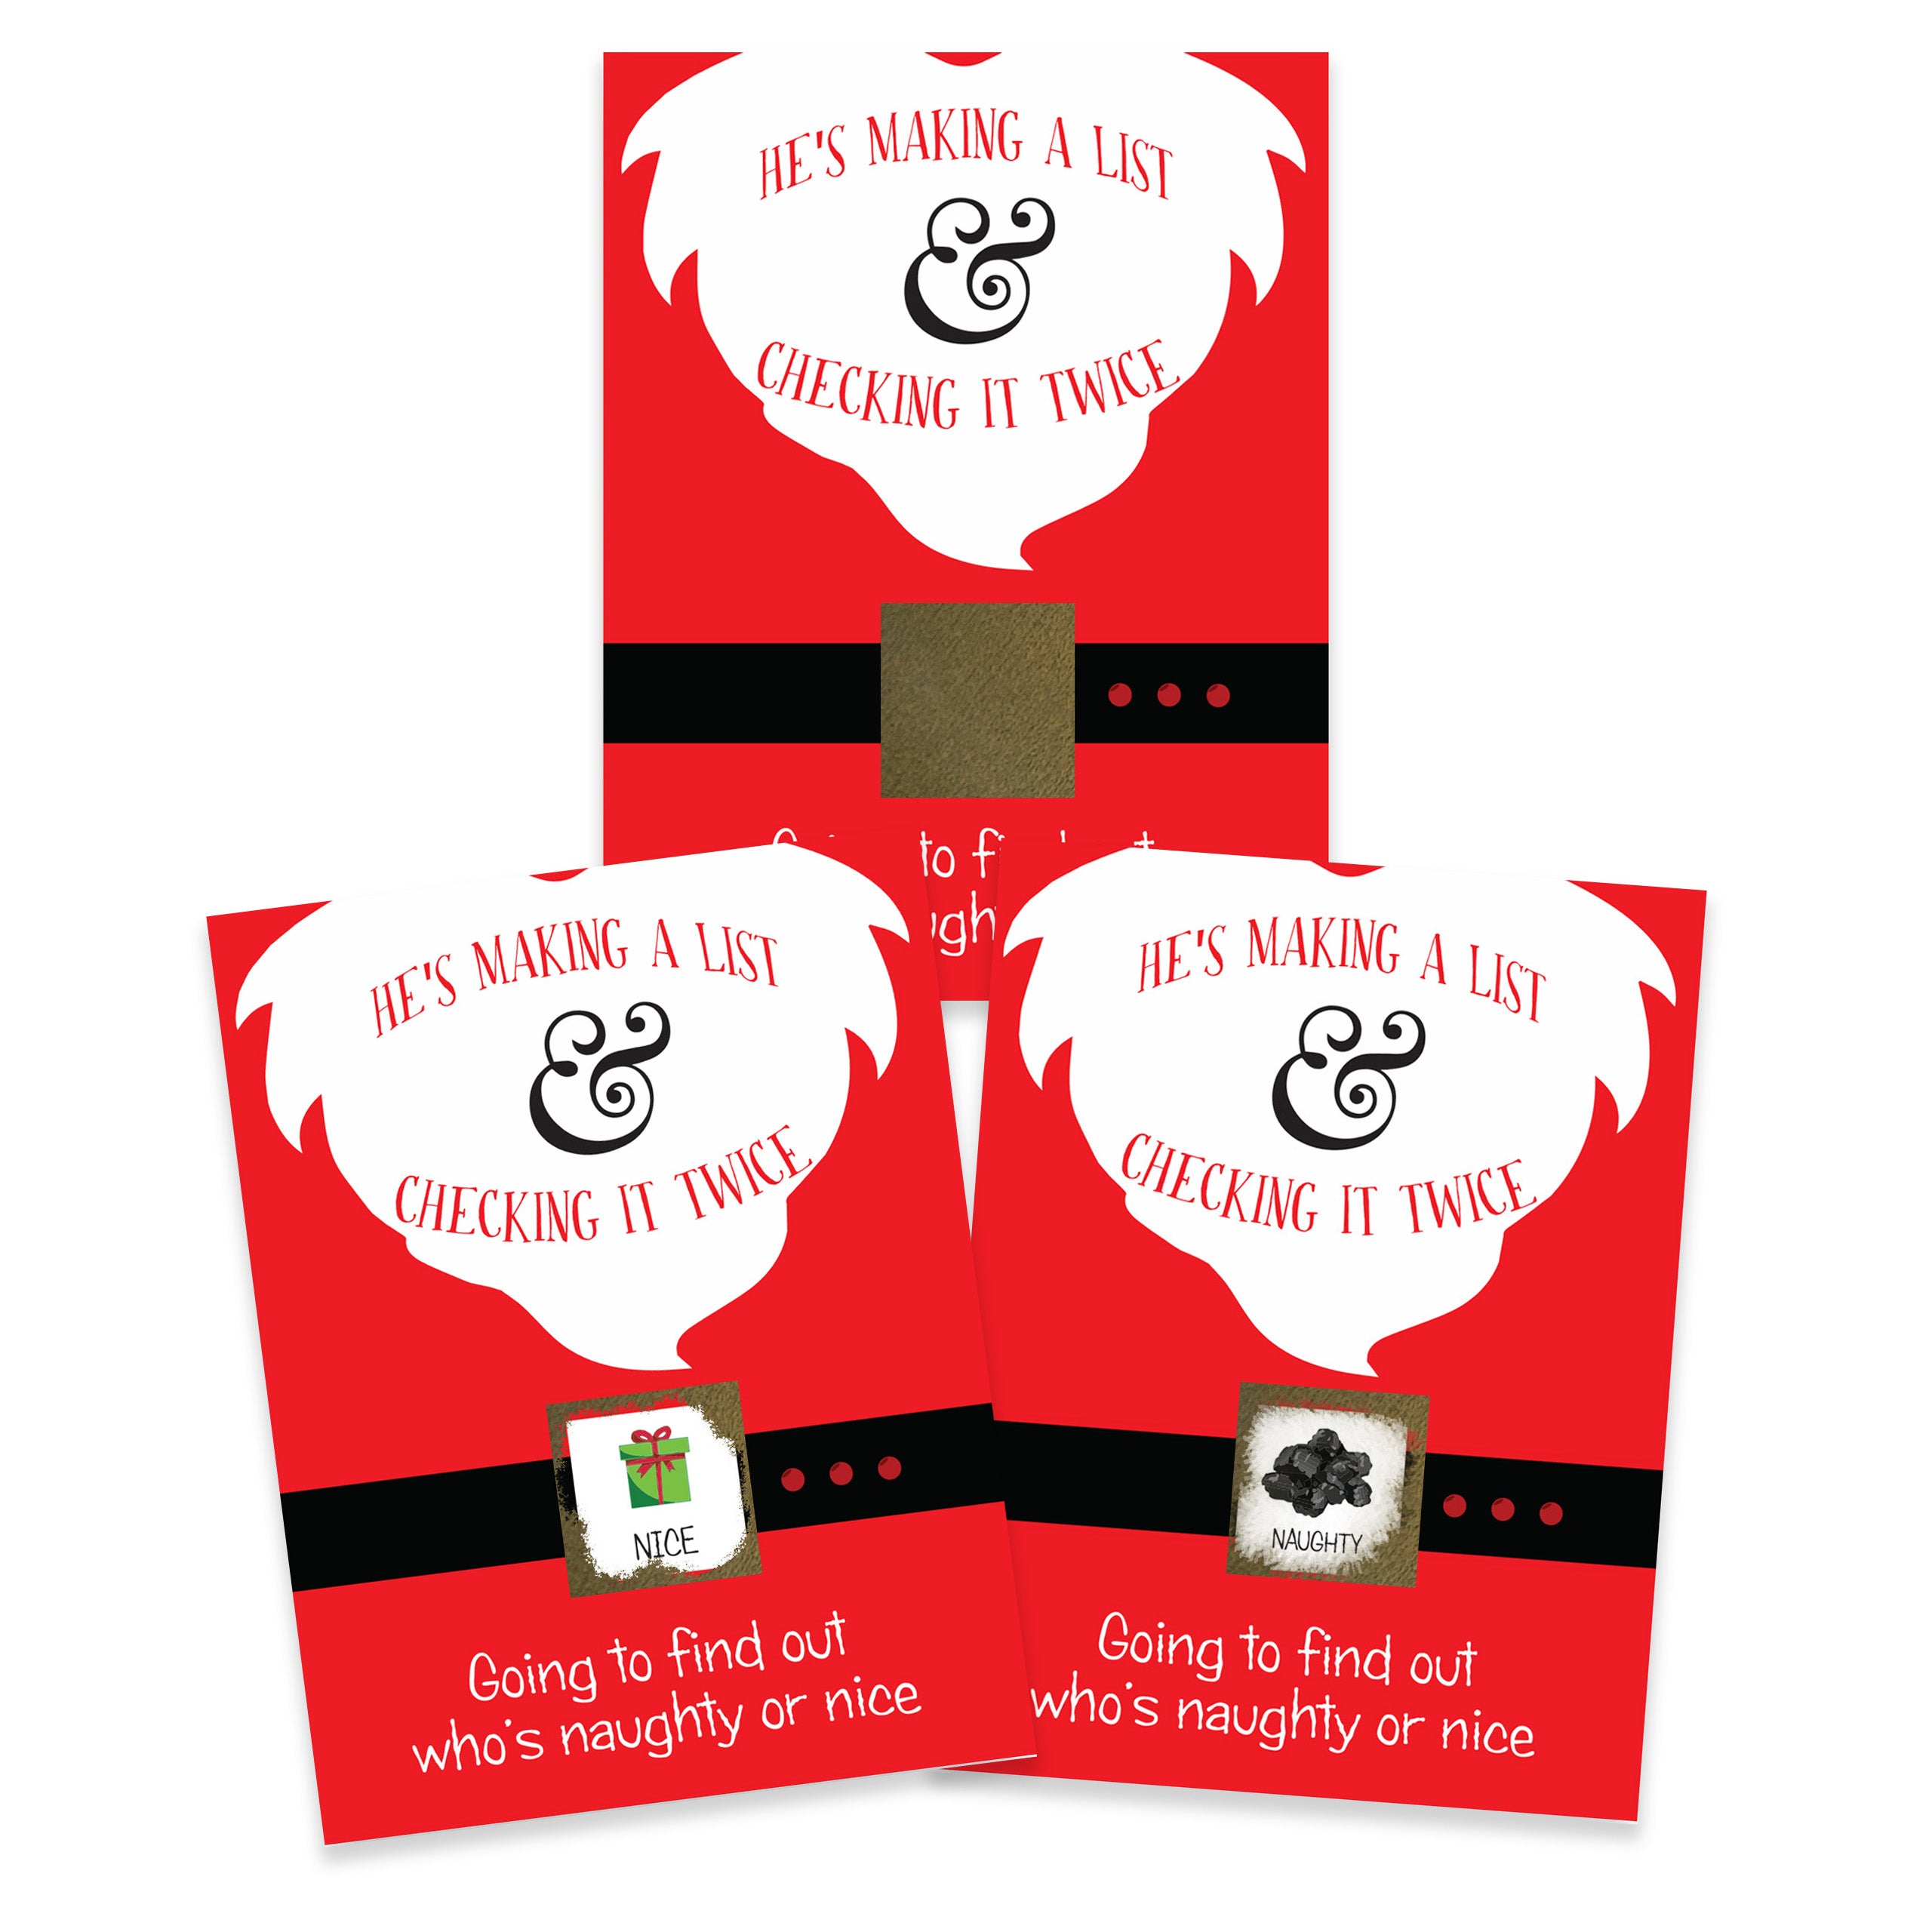 Santa Naughty or Nice Scratch Off Game Cards 26 Pack - 2 "Nice" Winning and 24 "Naughty" Non-Winning Cards